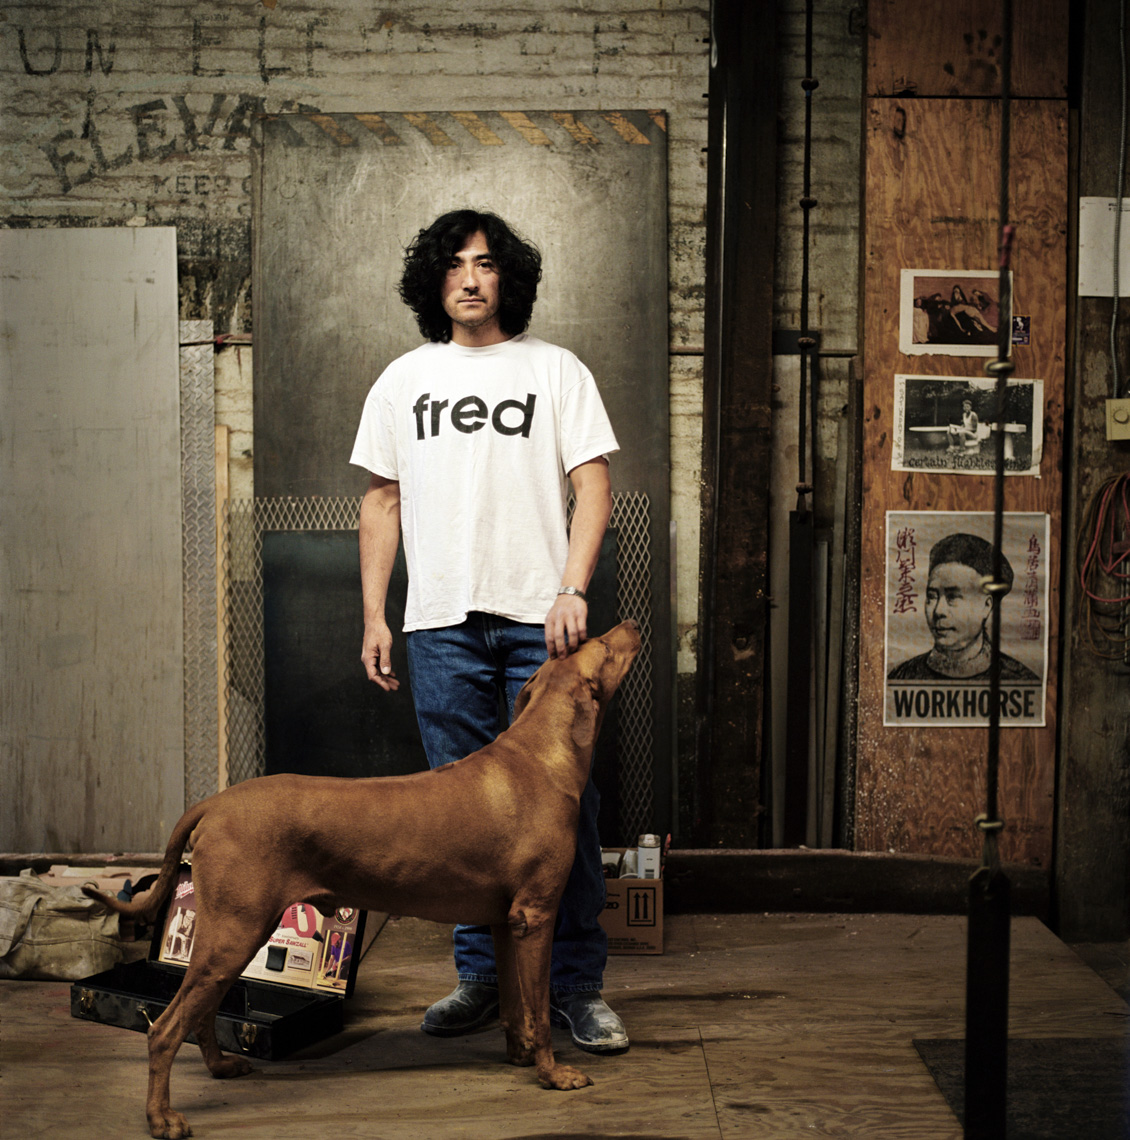  Editorial portrait of man in a t-shirt and standing with a dog by Washington DC photographer Ryan Donnell